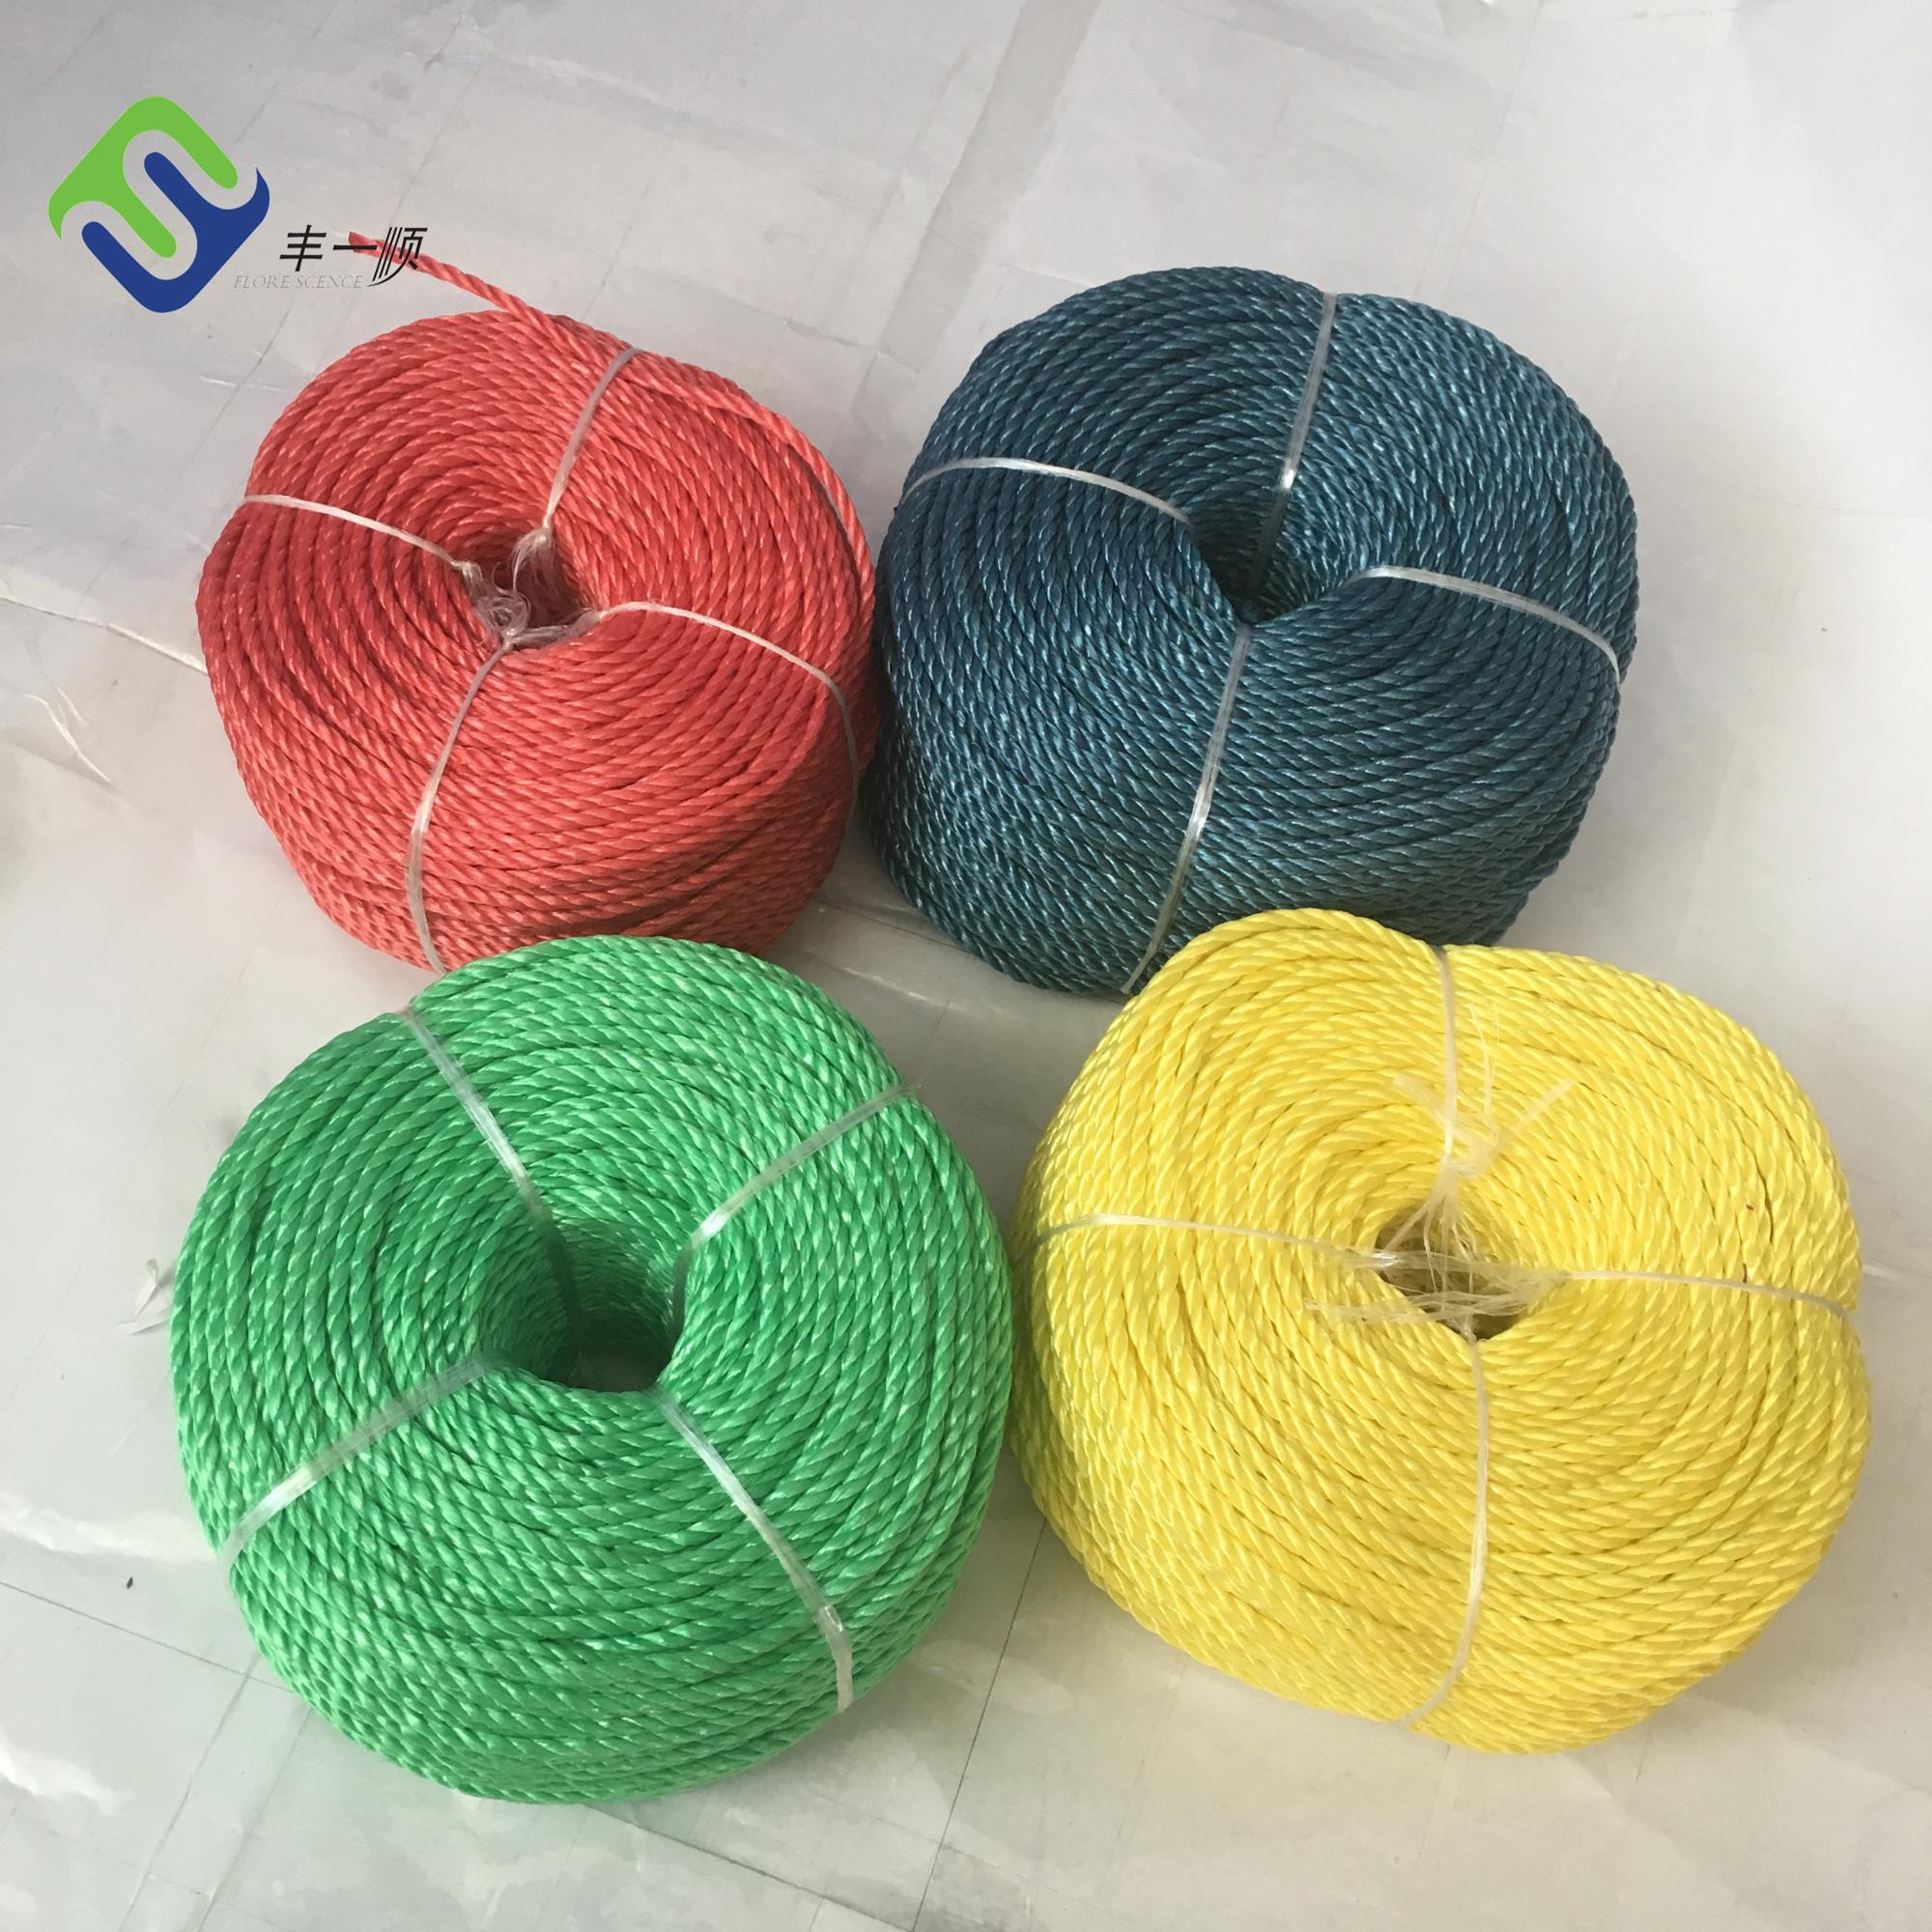 China Quality assured PP plastic packing rope factory and manufacturers ...